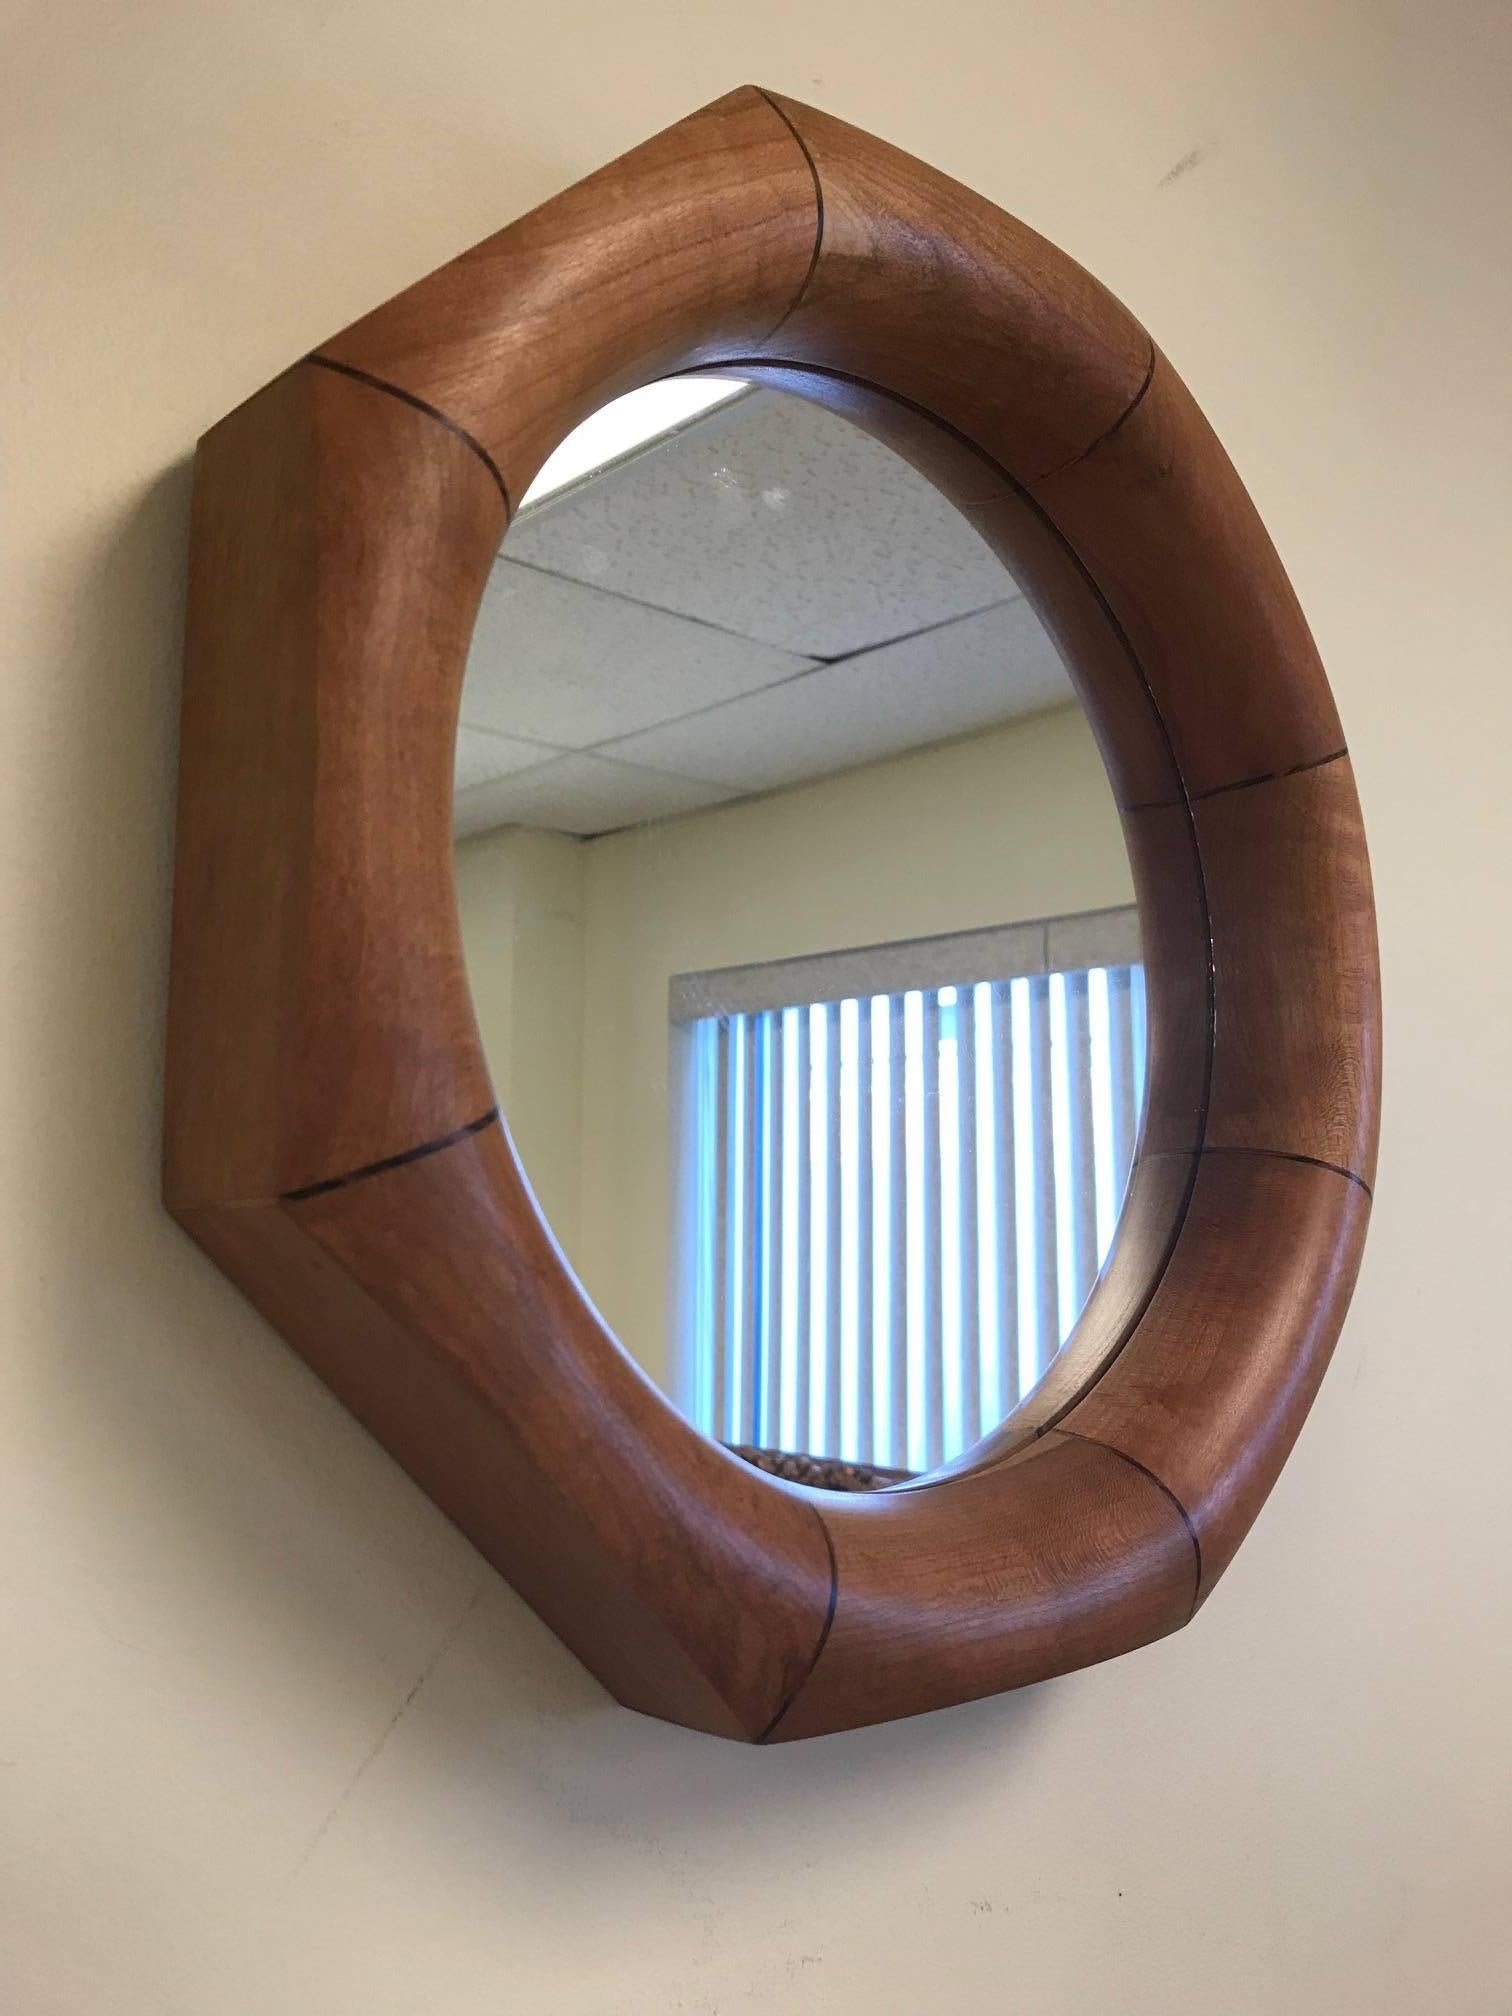 Custom octagonal walnut mirror with rosewood inlay.
The mirror listed is currently available.